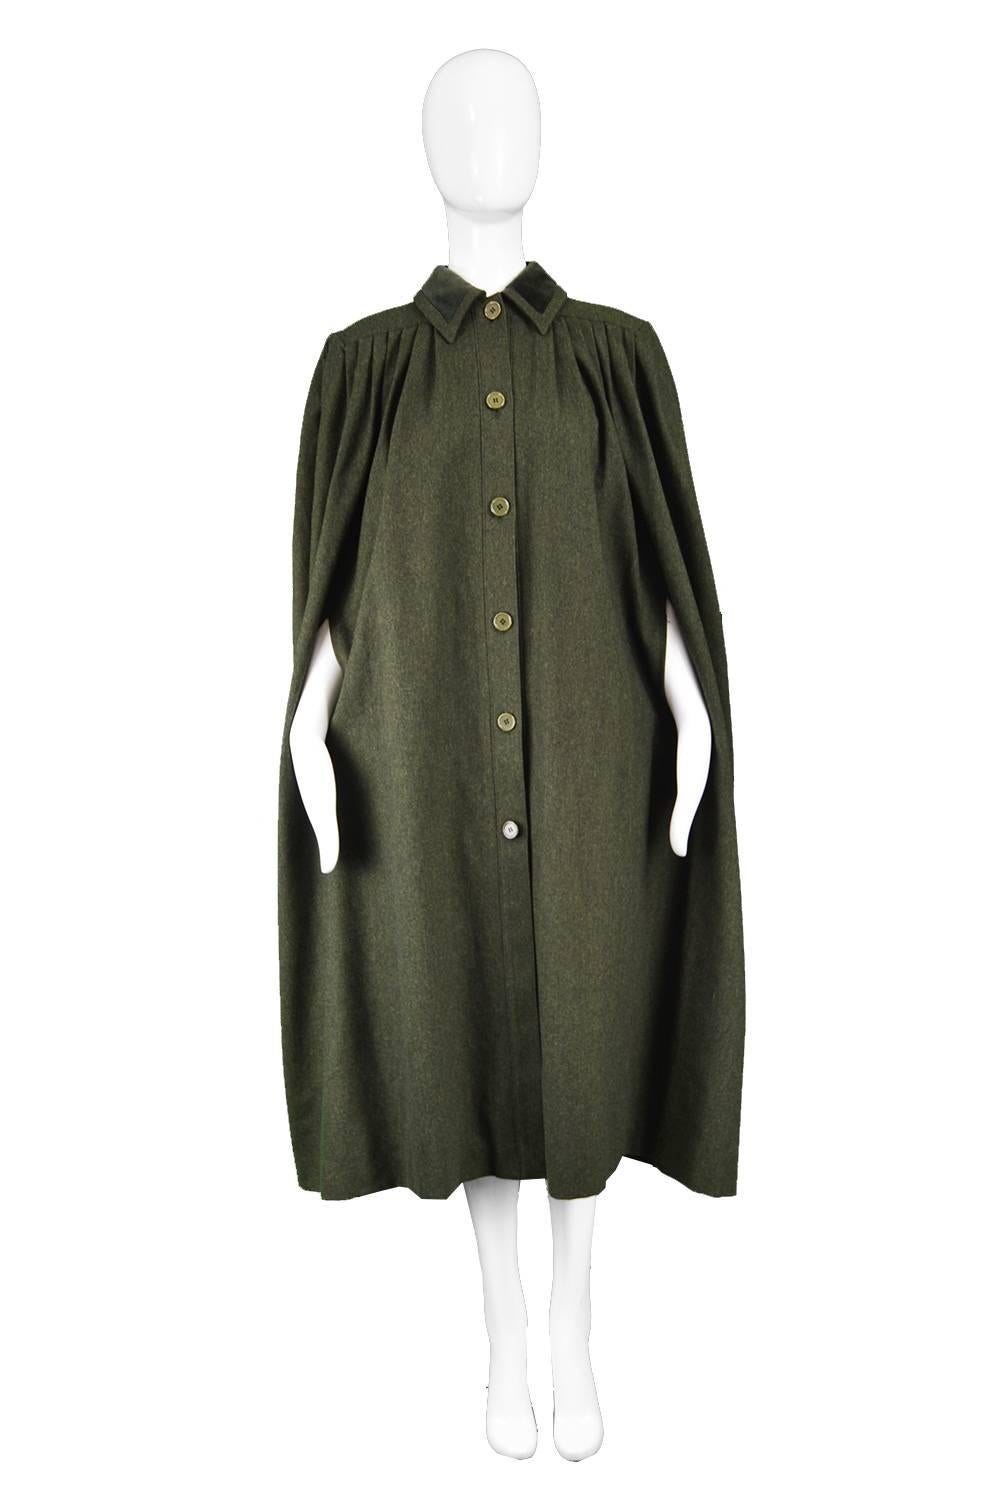 Valentino Dark Green Vintage Wool & Velvet Pleated Maxi Cape Coat, 1980s

Estimated Size: women's Medium to Large, would fit most sizes but due to the amount of fabric it might swamp a more petite lady 
Bust - Free
Waist - Free
Hips -